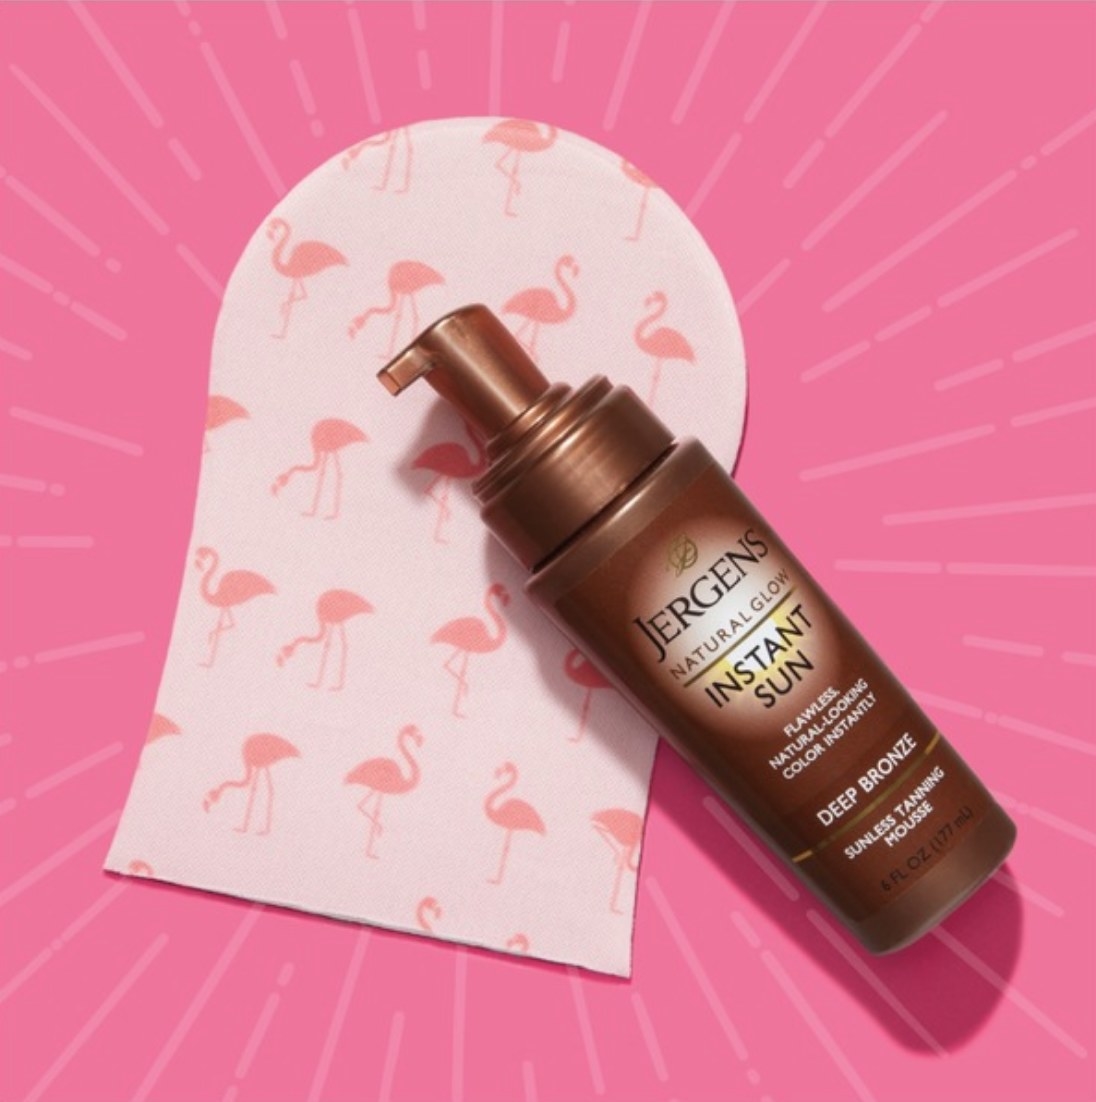 A bottle of self-tanning mousse